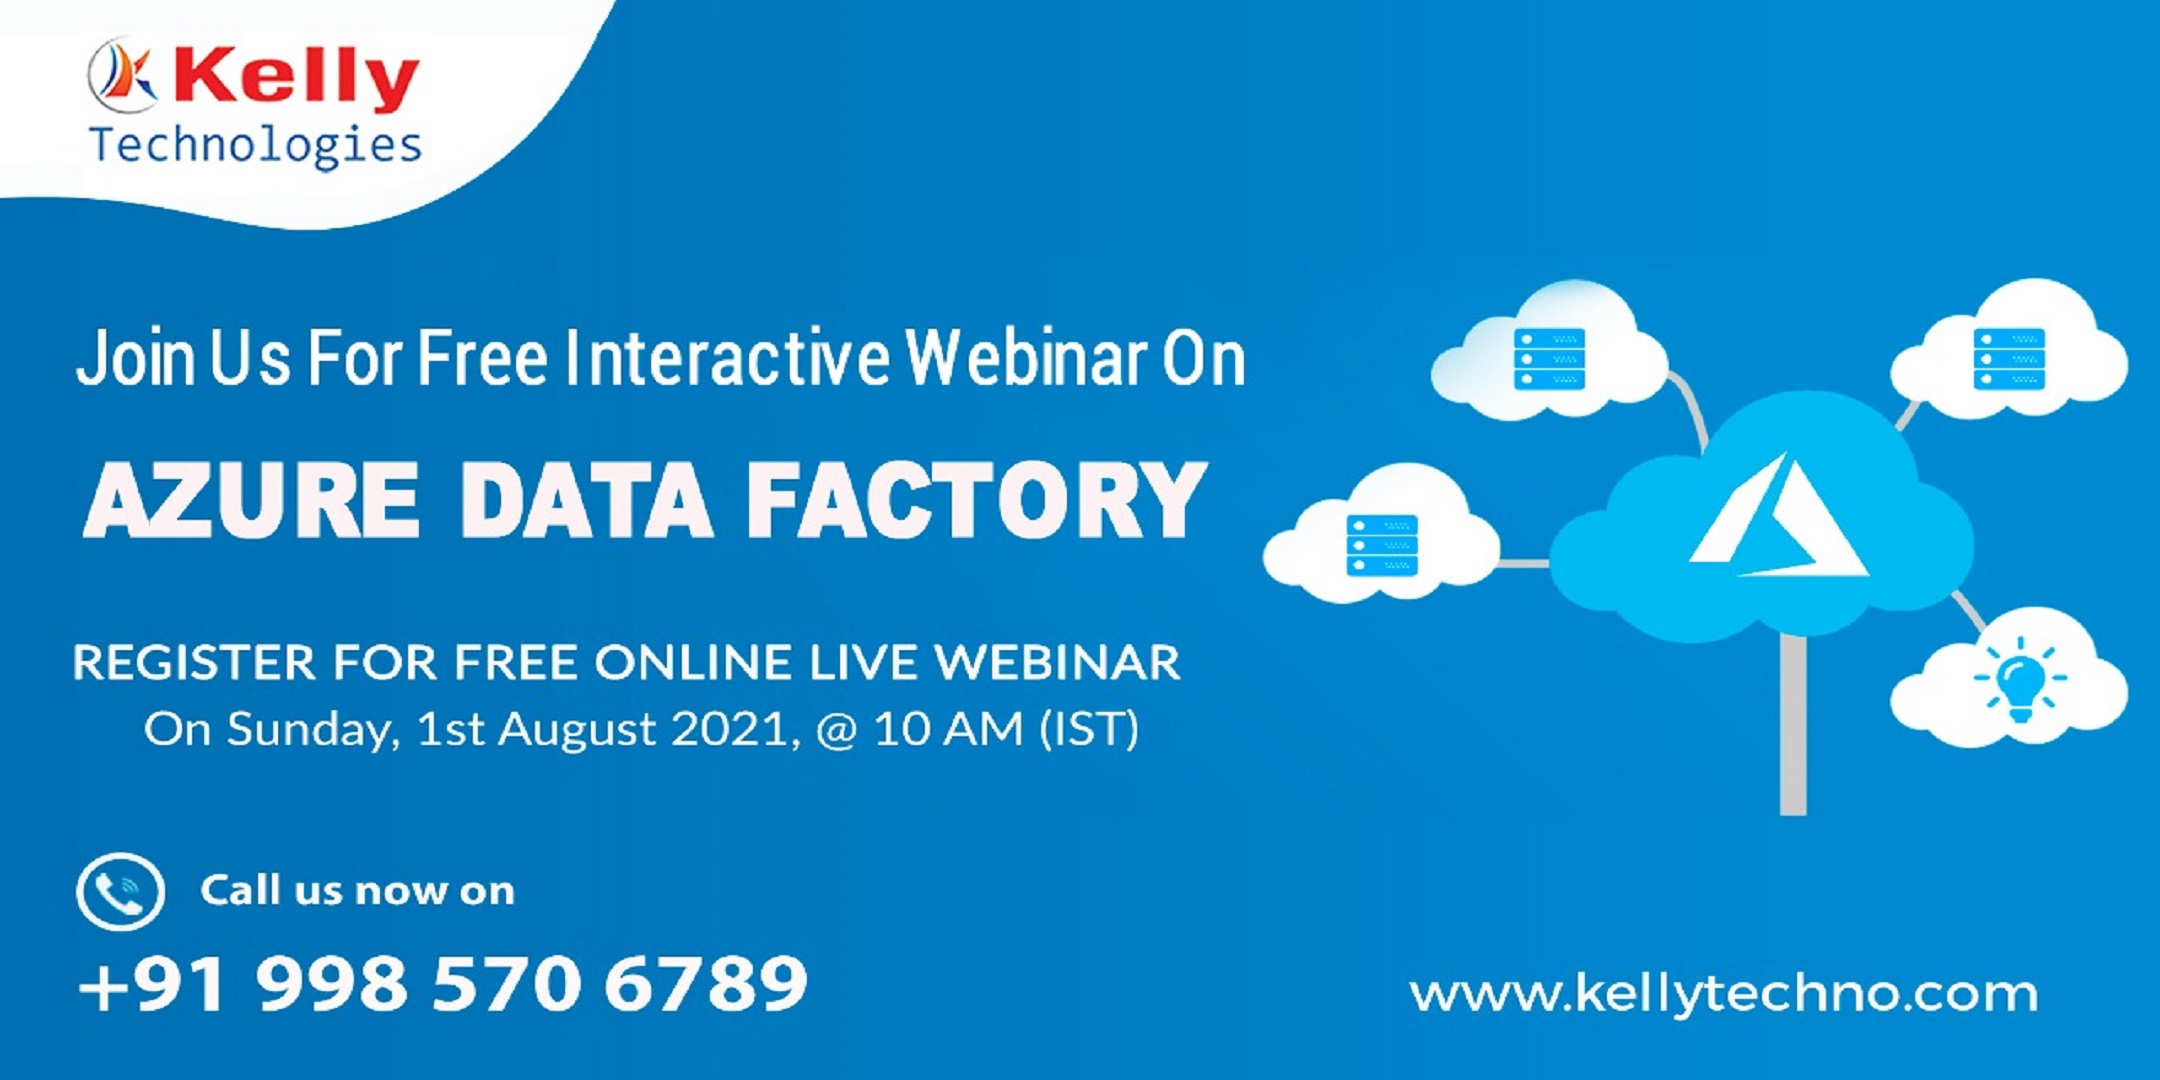 Register For Free Azure Data Factory Free Online Demo On Sun 1st Aug 2021, @ 10 AM, Hyderabad, Telangana, India